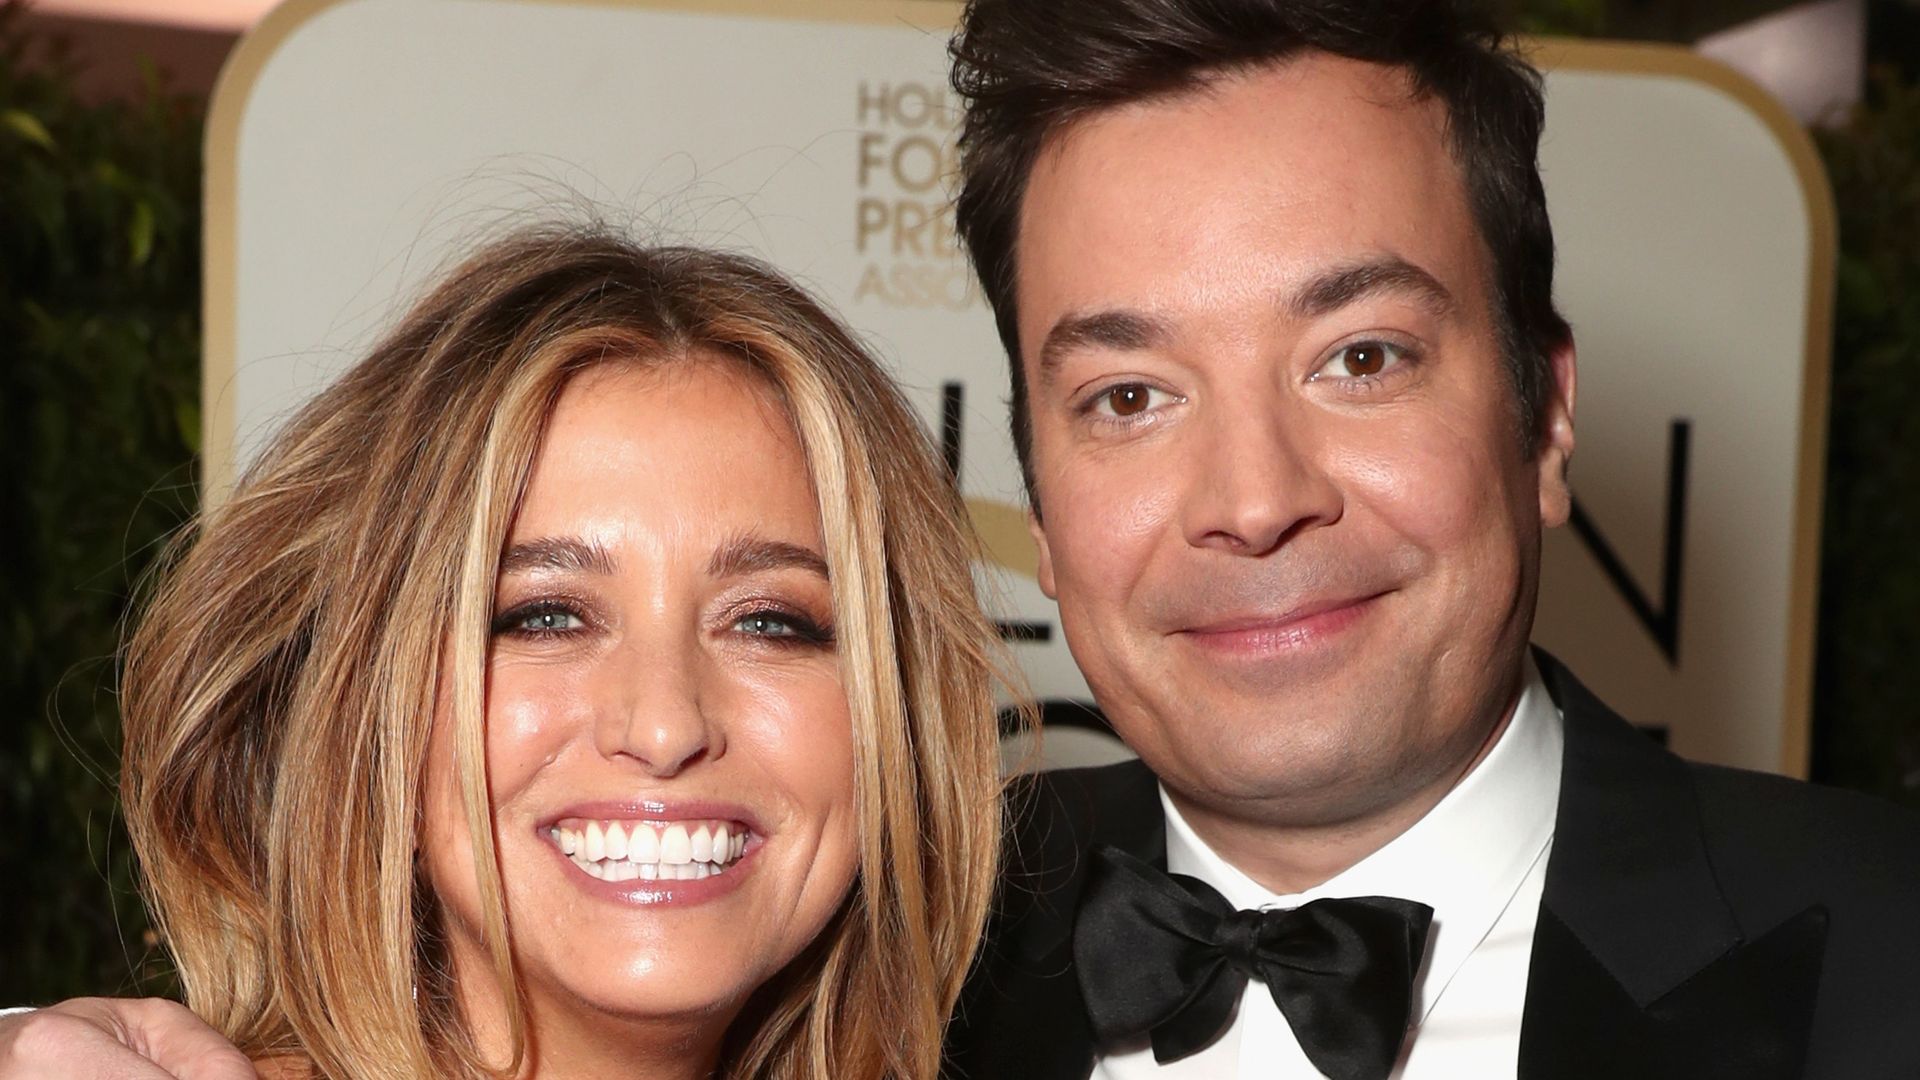 Nancy Juvonen with her husband Jimmy Fallon at the Golden Globe Awards